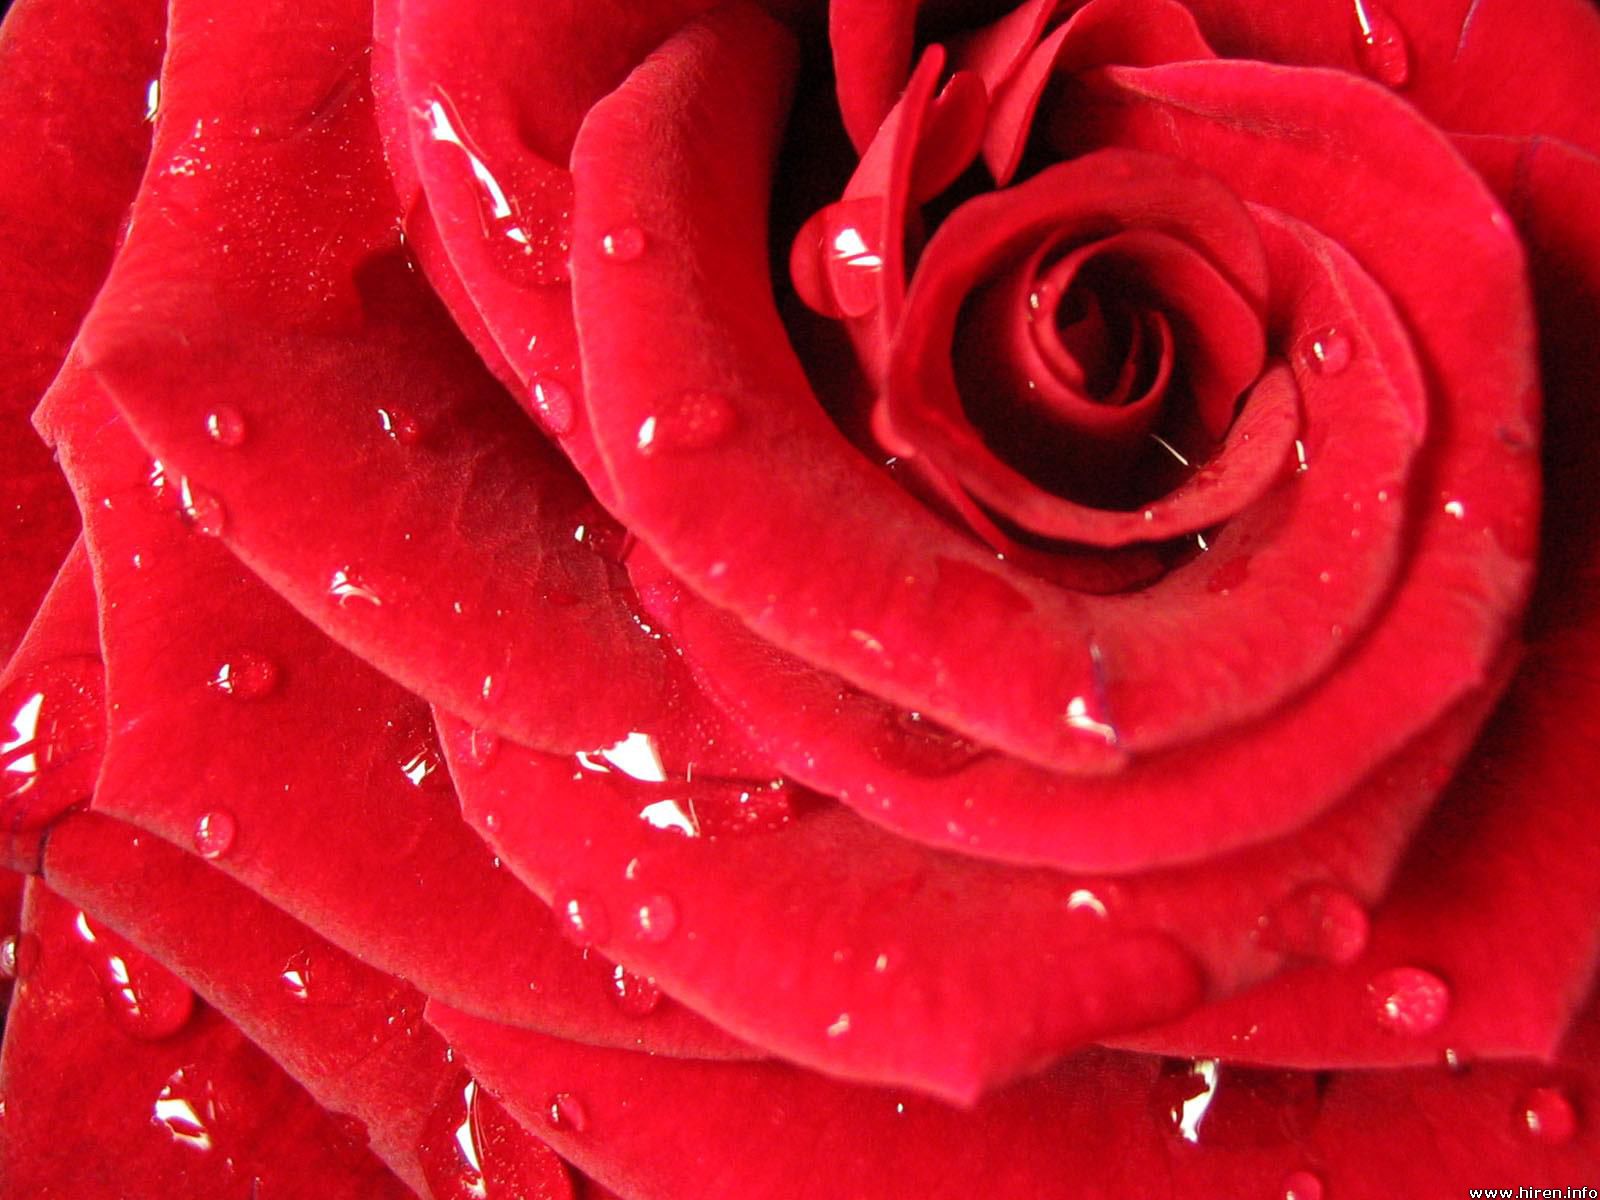 Free Flowers Photo And Wallpapers: red rose flowers wallpapers, flower ...